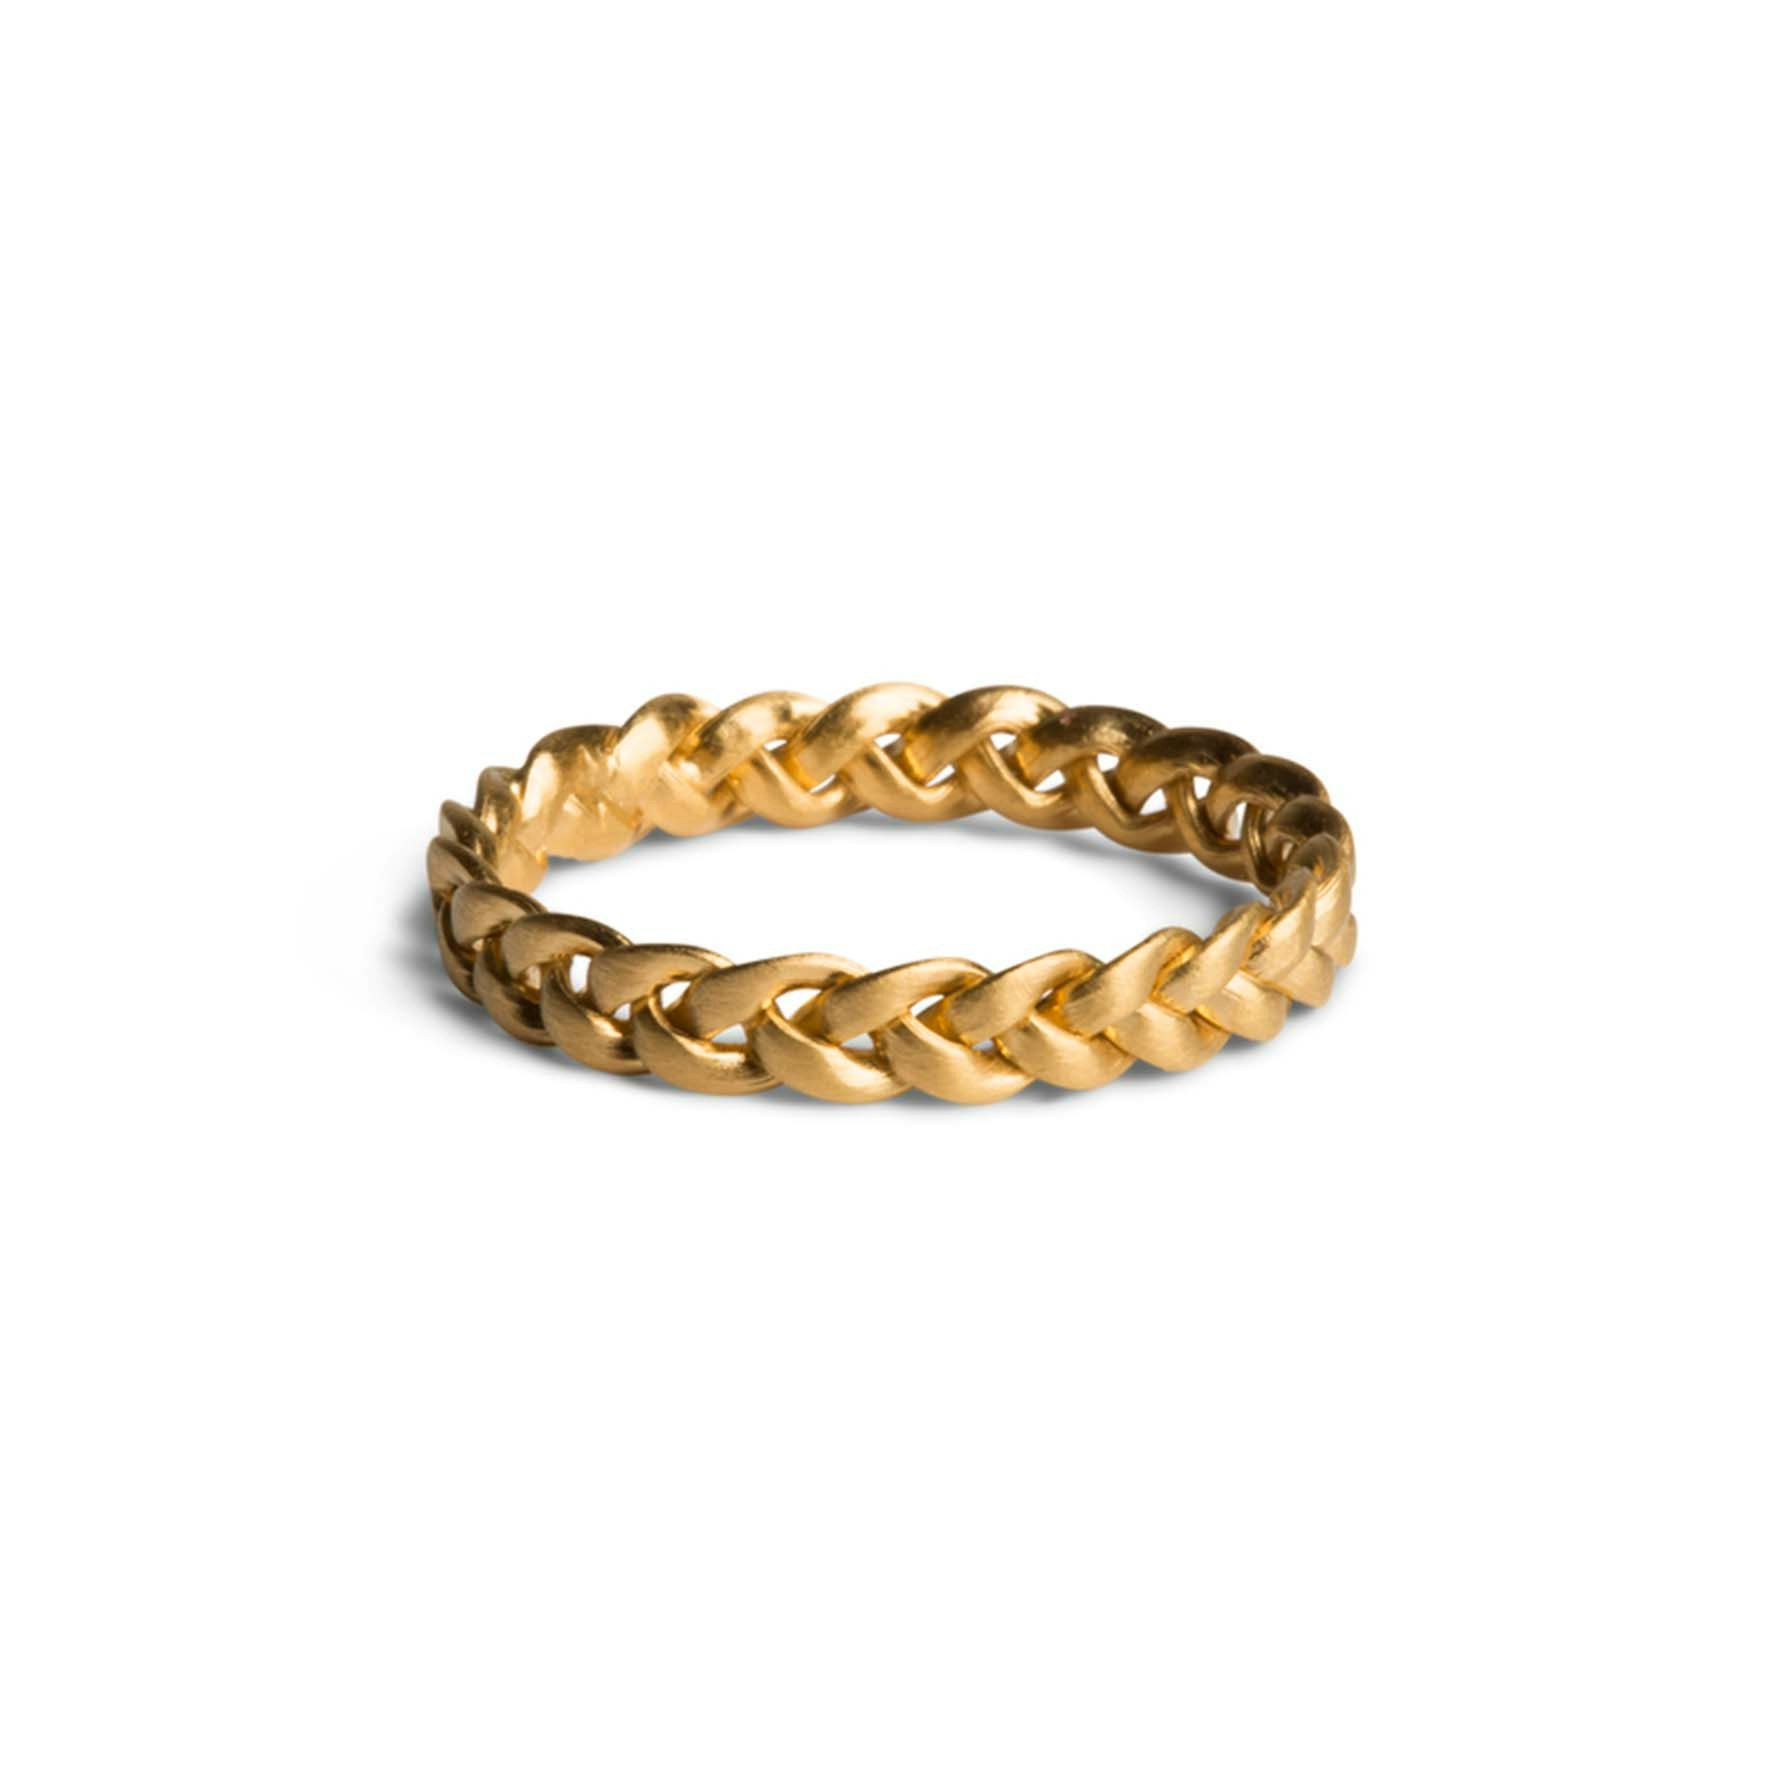 Medium Braided Ring from Jane Kønig in Goldplated Silver Sterling 925